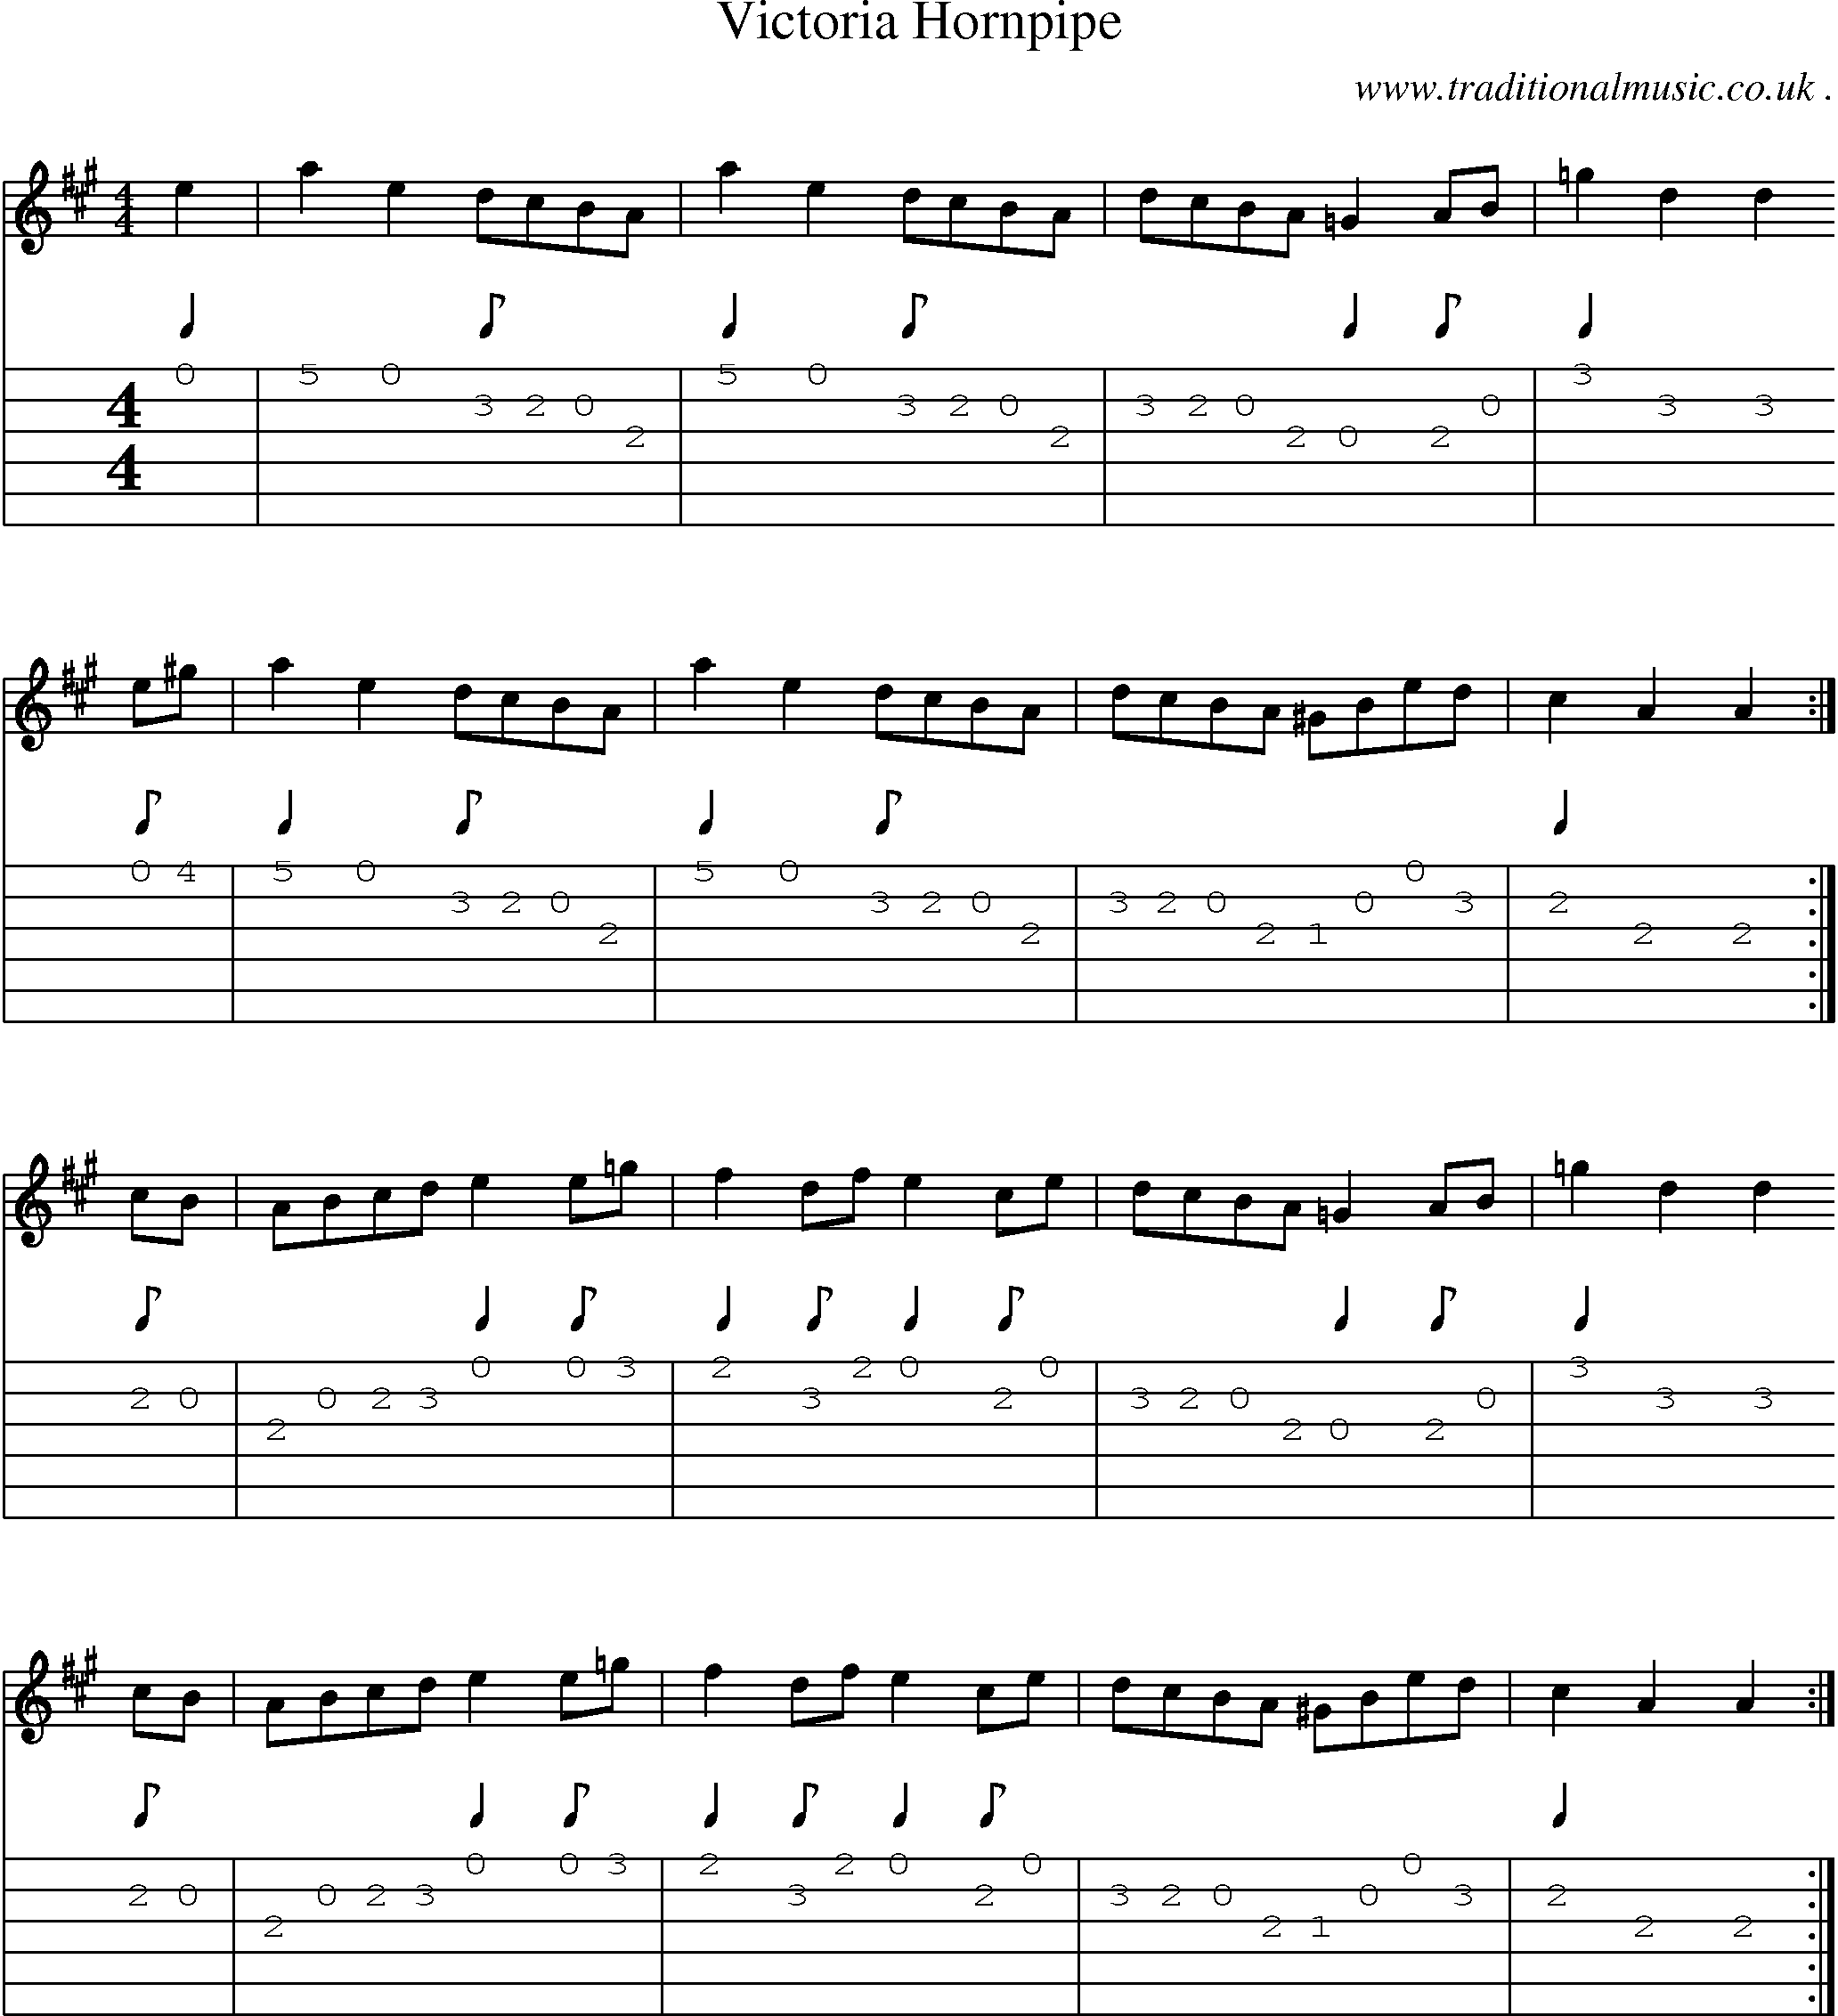 Sheet-music  score, Chords and Guitar Tabs for Victoria Hornpipe